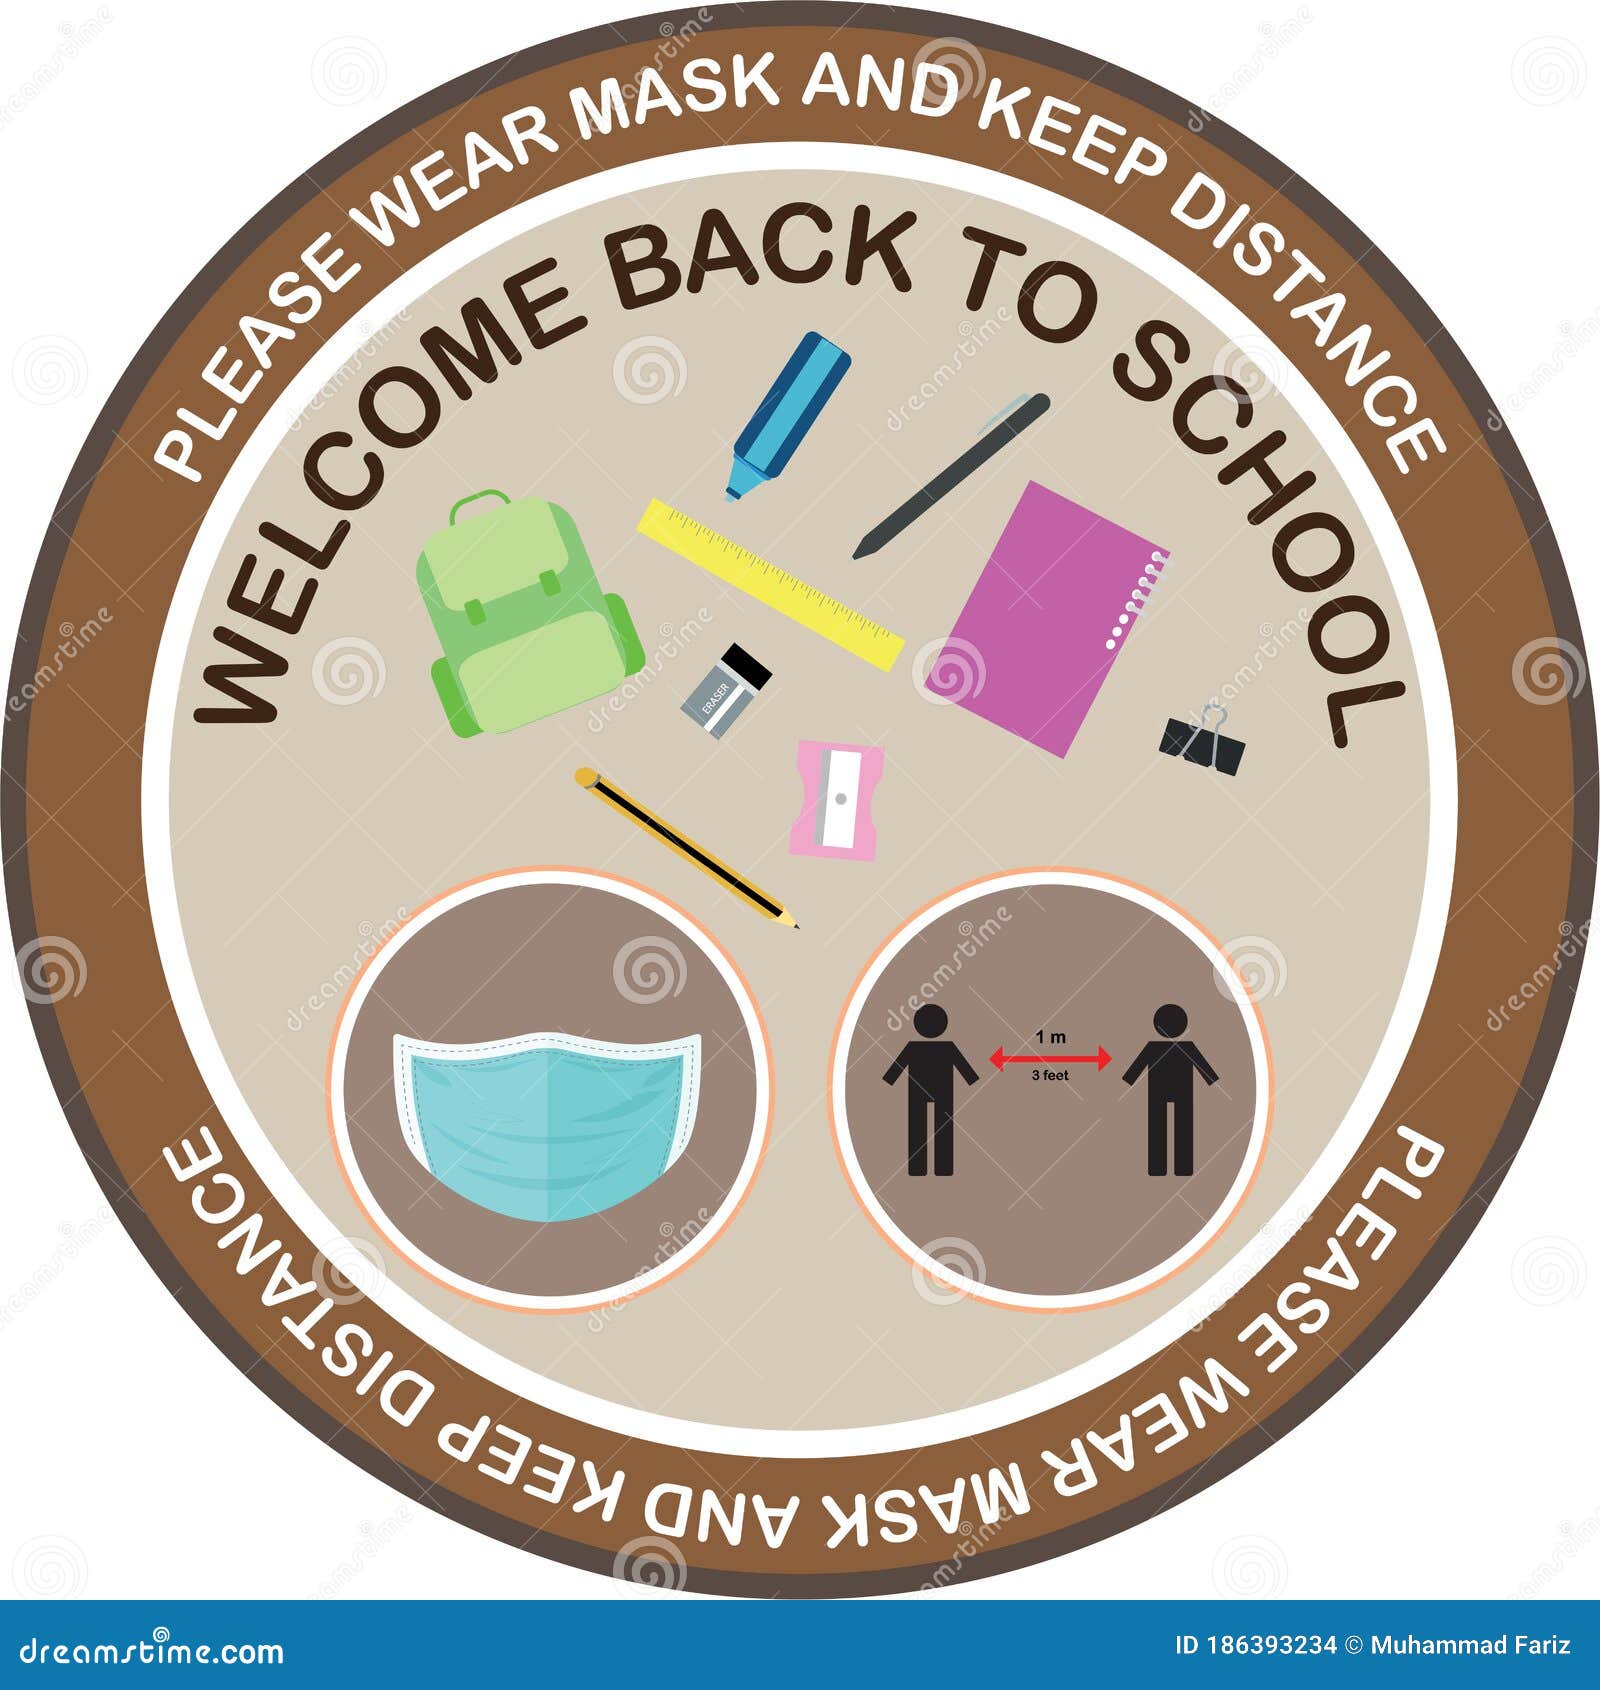 Welcome Back To School Keep Your Distance Round Vector Illustration Sign For Post Covid 19 Coronavirus Pandemic Stock Vector Illustration Of Post Public